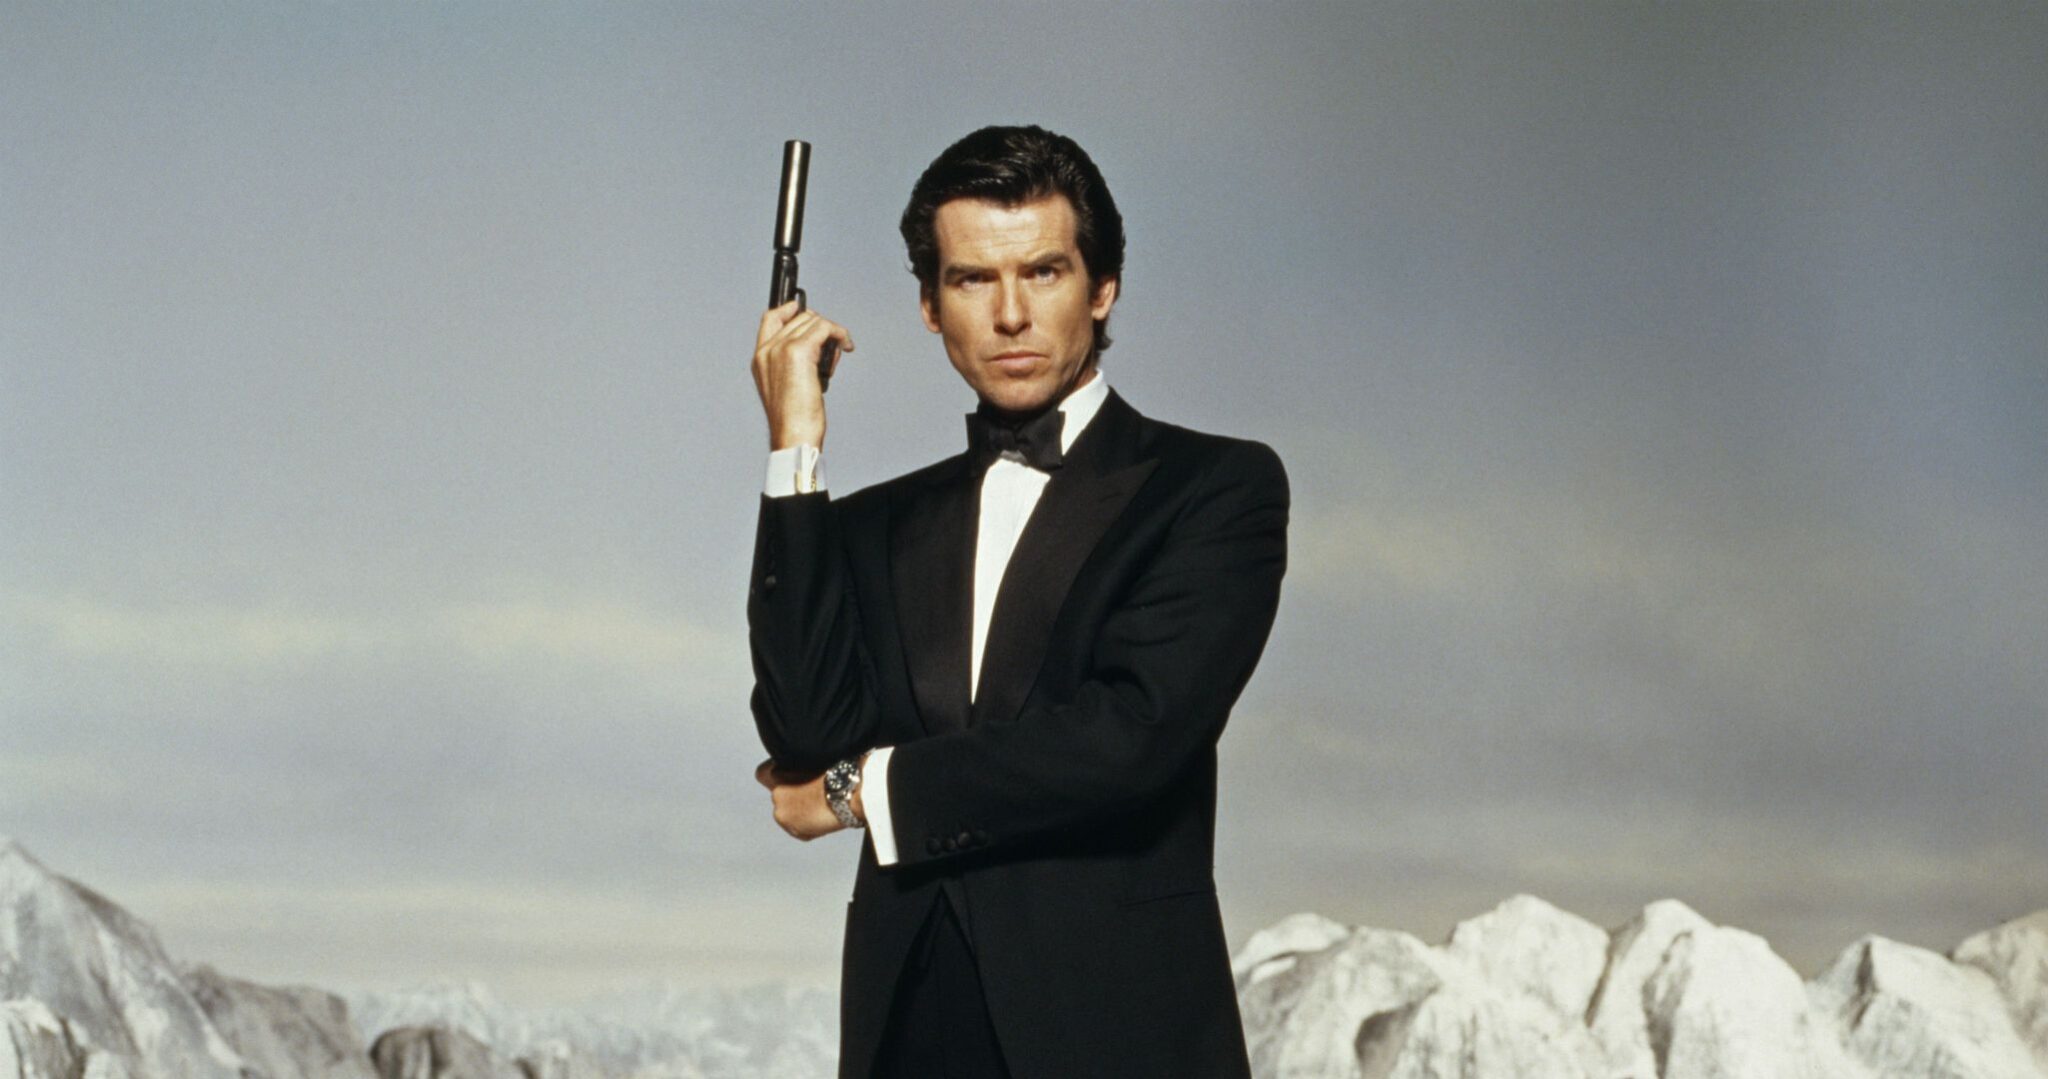 The Best James Bond Movie According To Fans